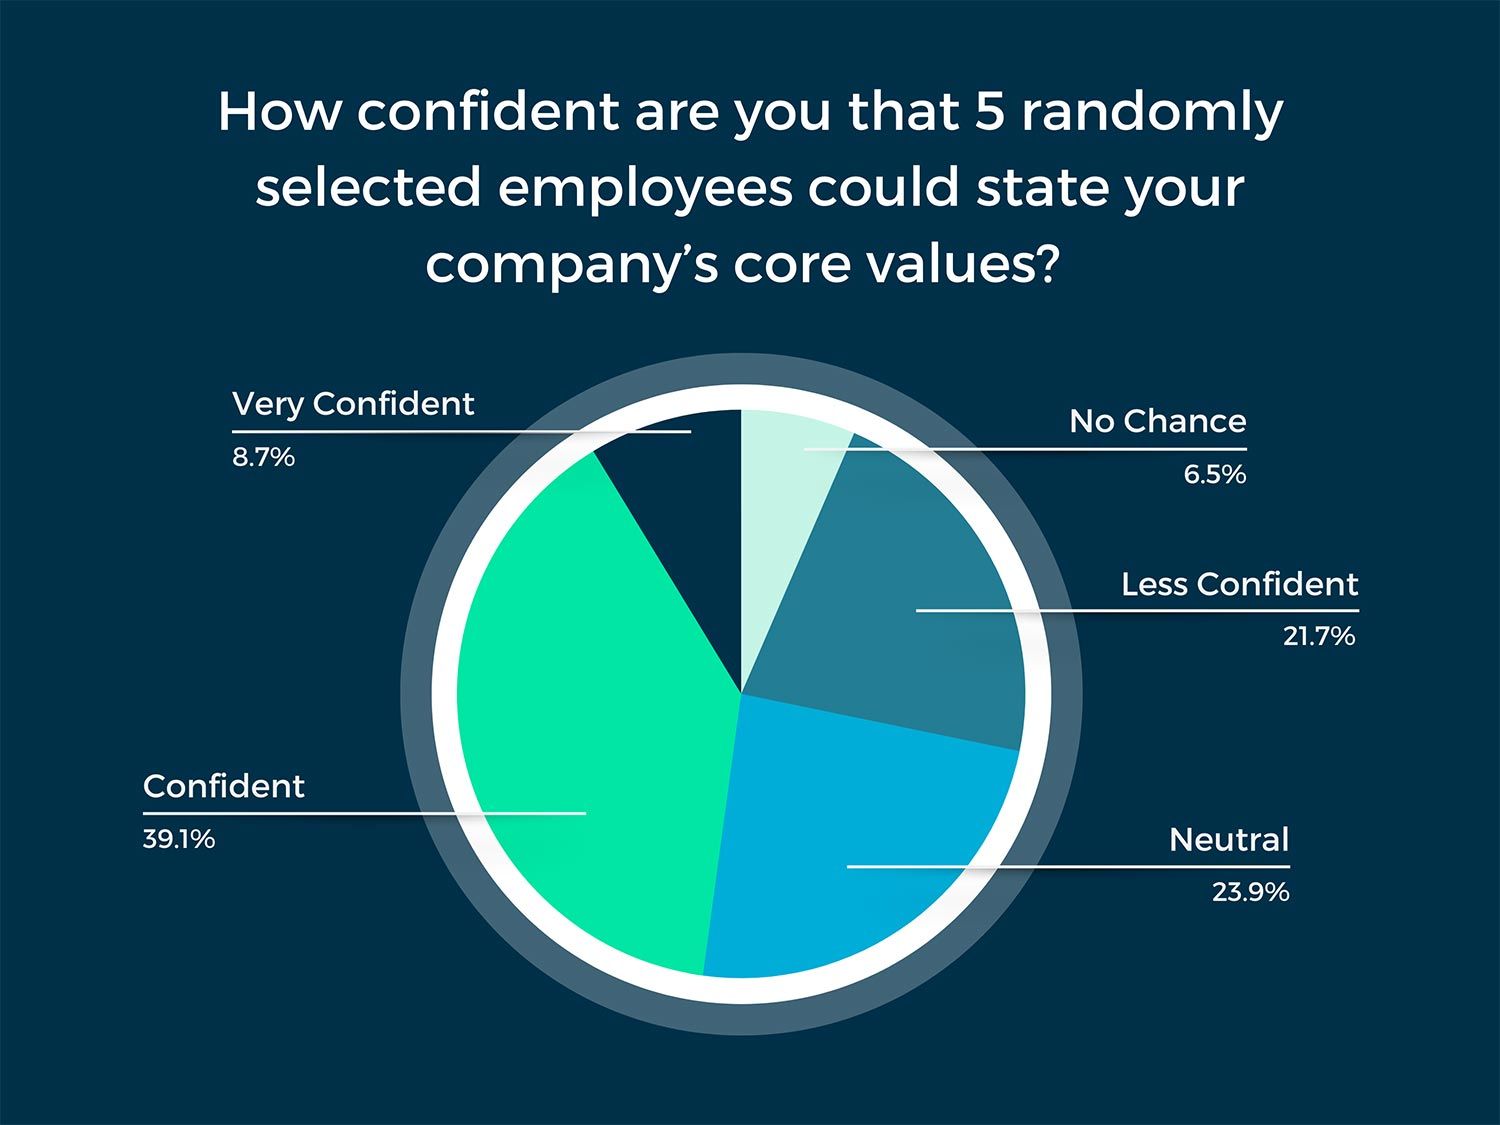 How confident are you that 5 randomly selected employees could state your company’s core values? 